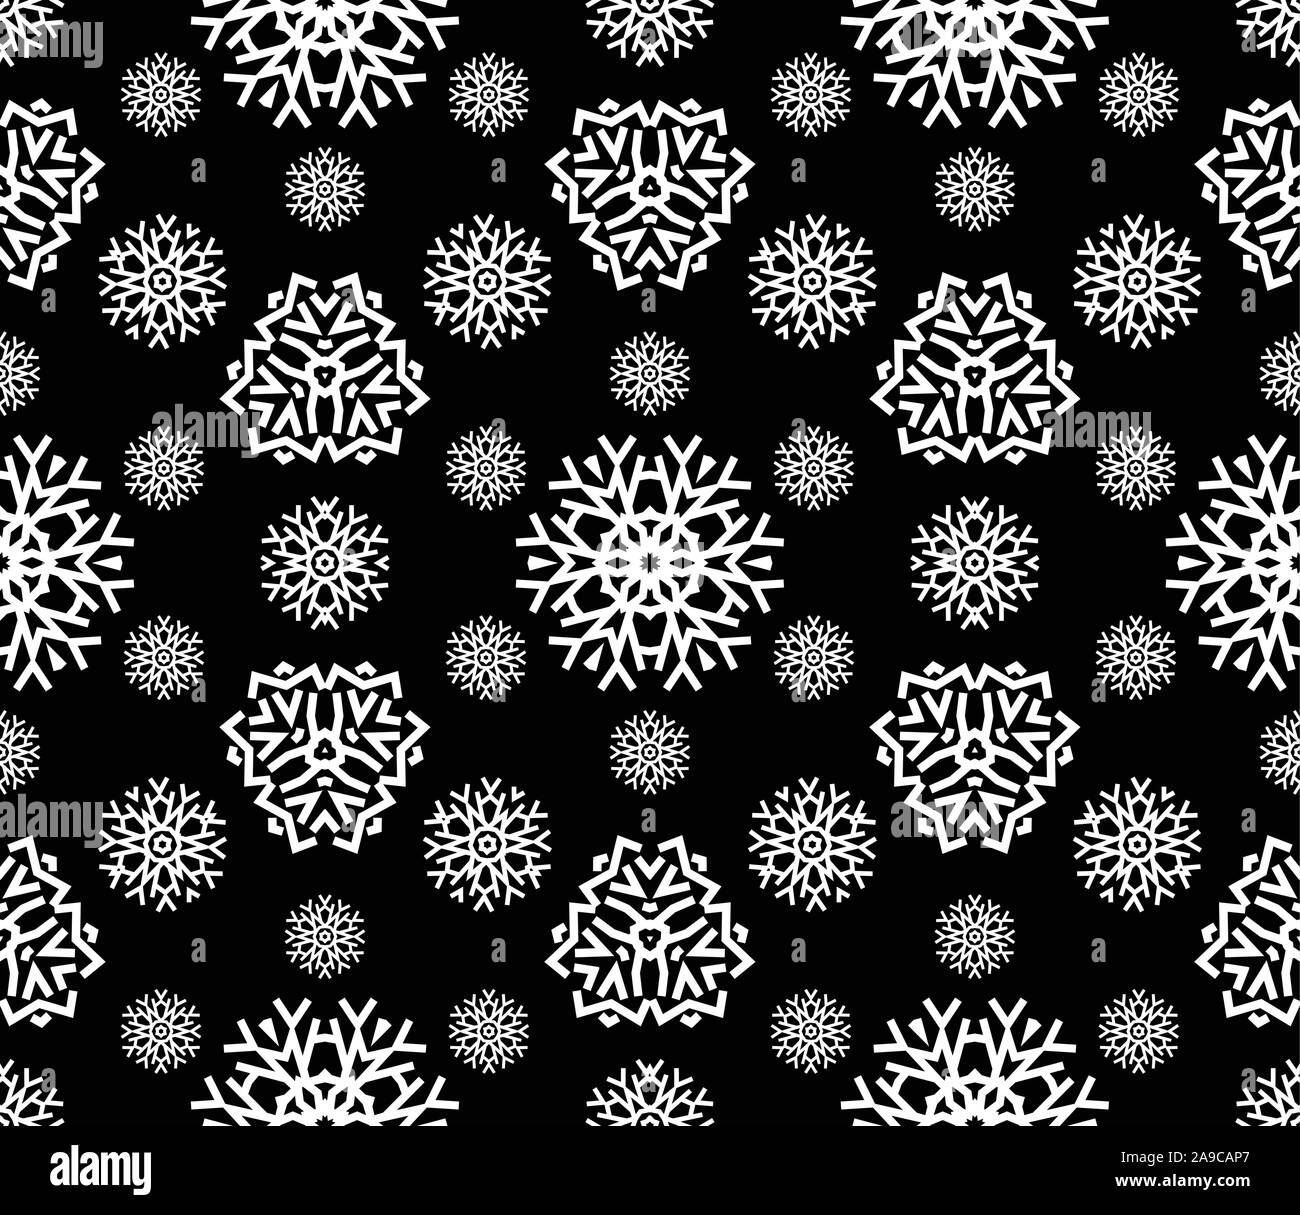 Snowflake icon in doodle sketch lines. Nature snowflakes winter